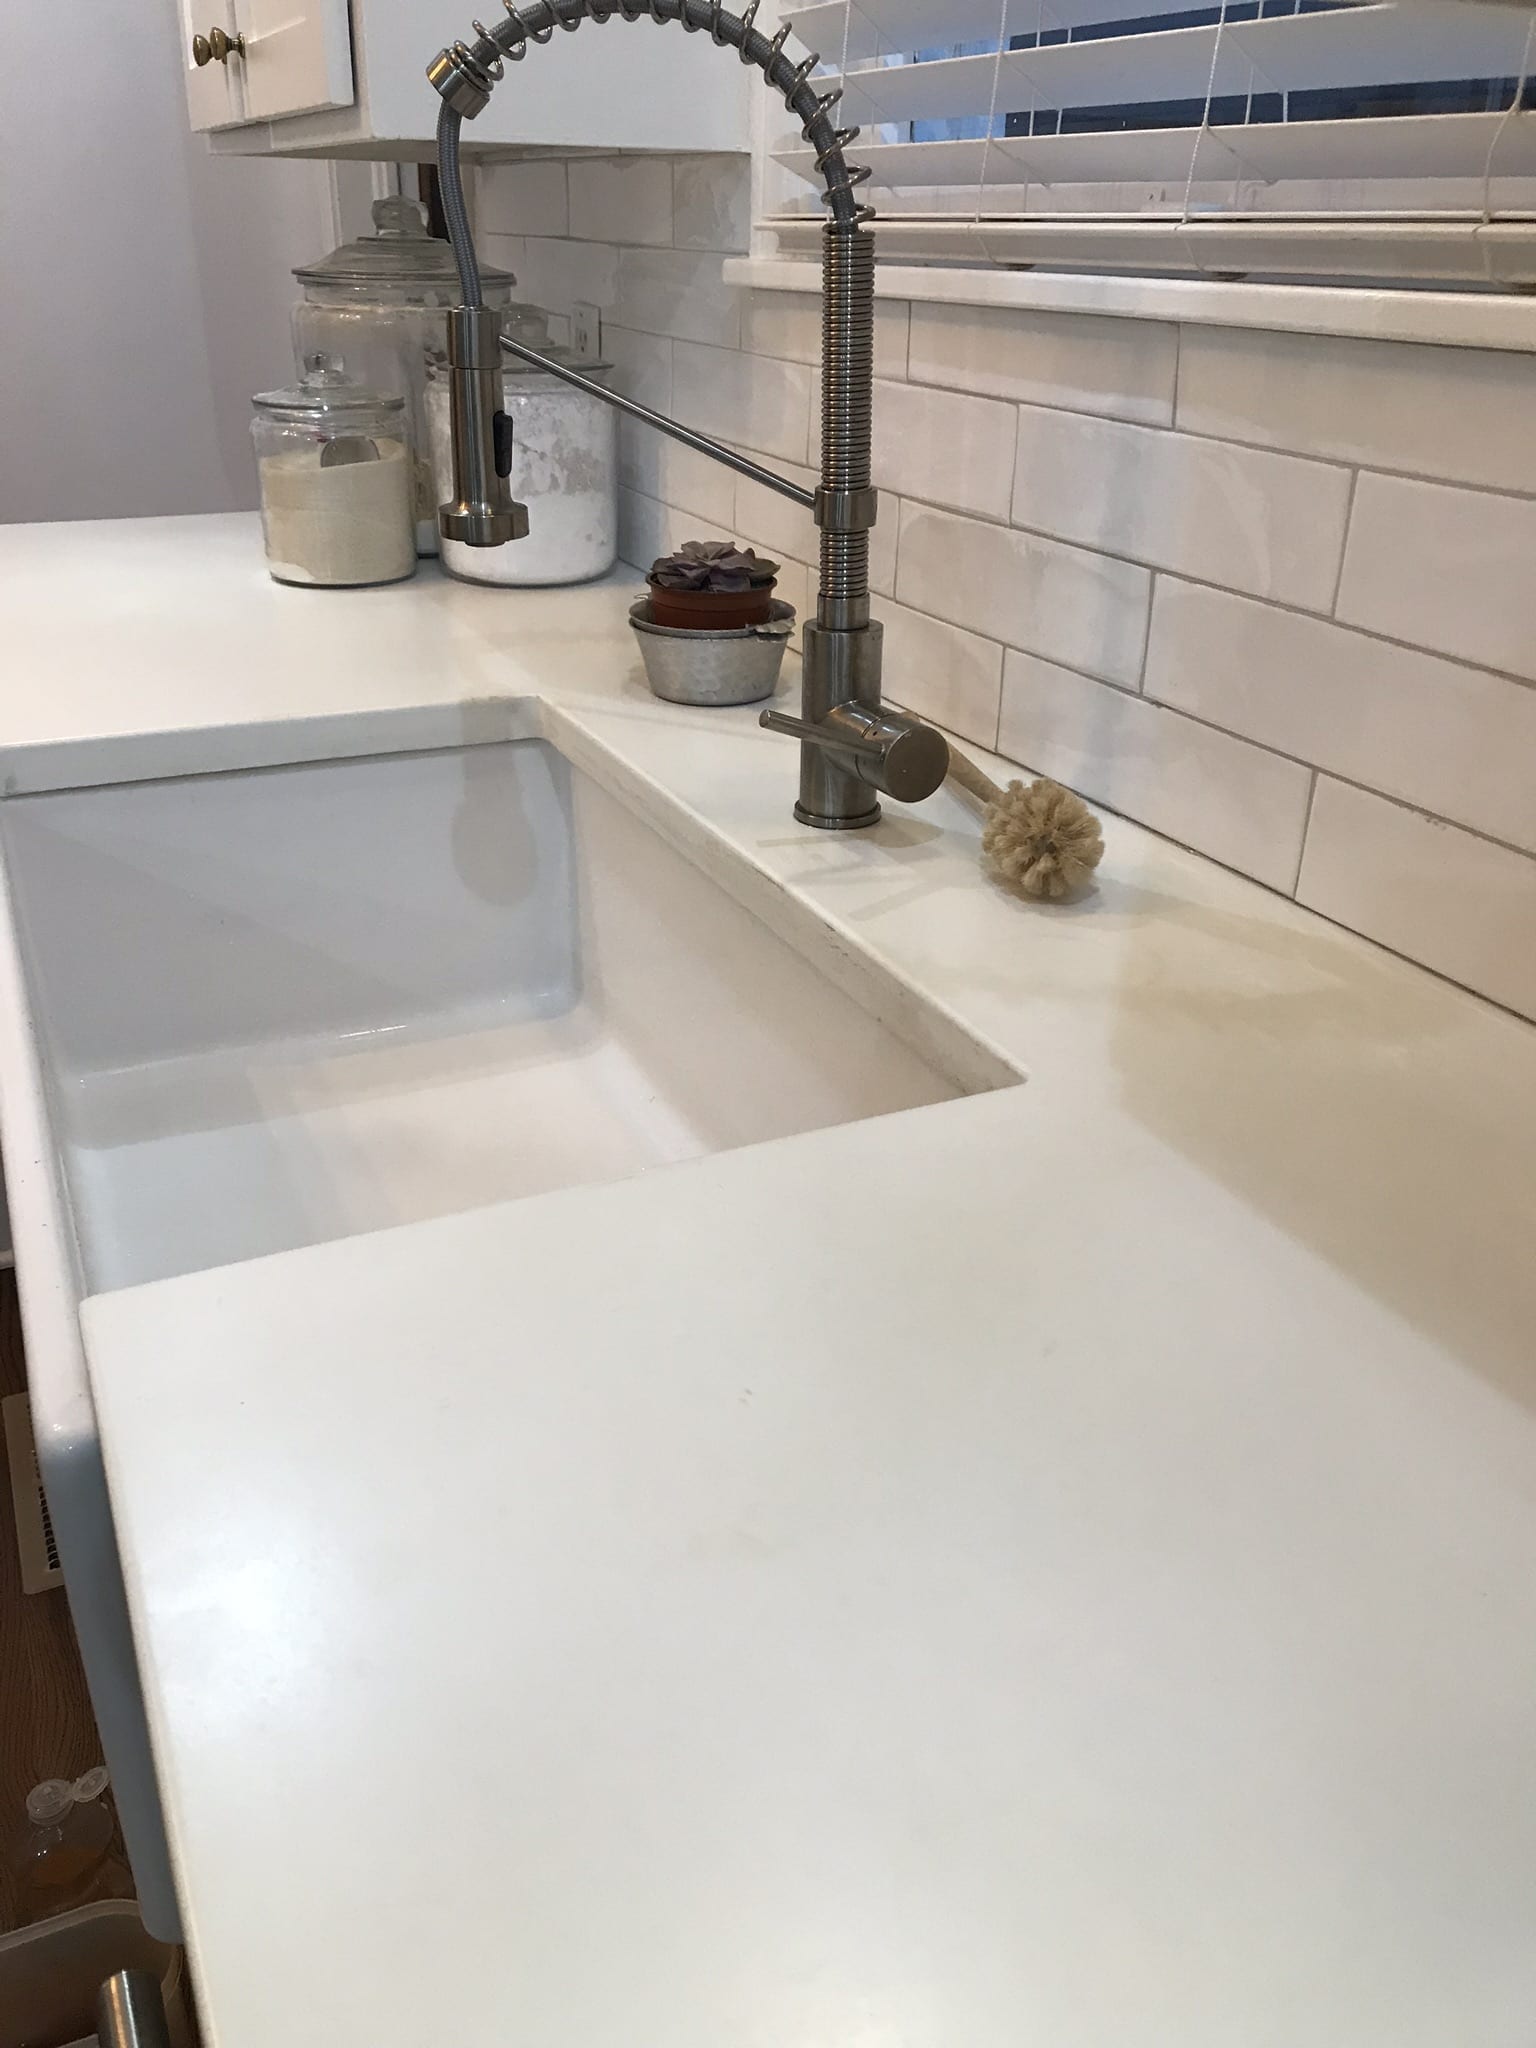 Kitchen Countertop made with White Countertop Mix and Titanium Dioxide White Pigment